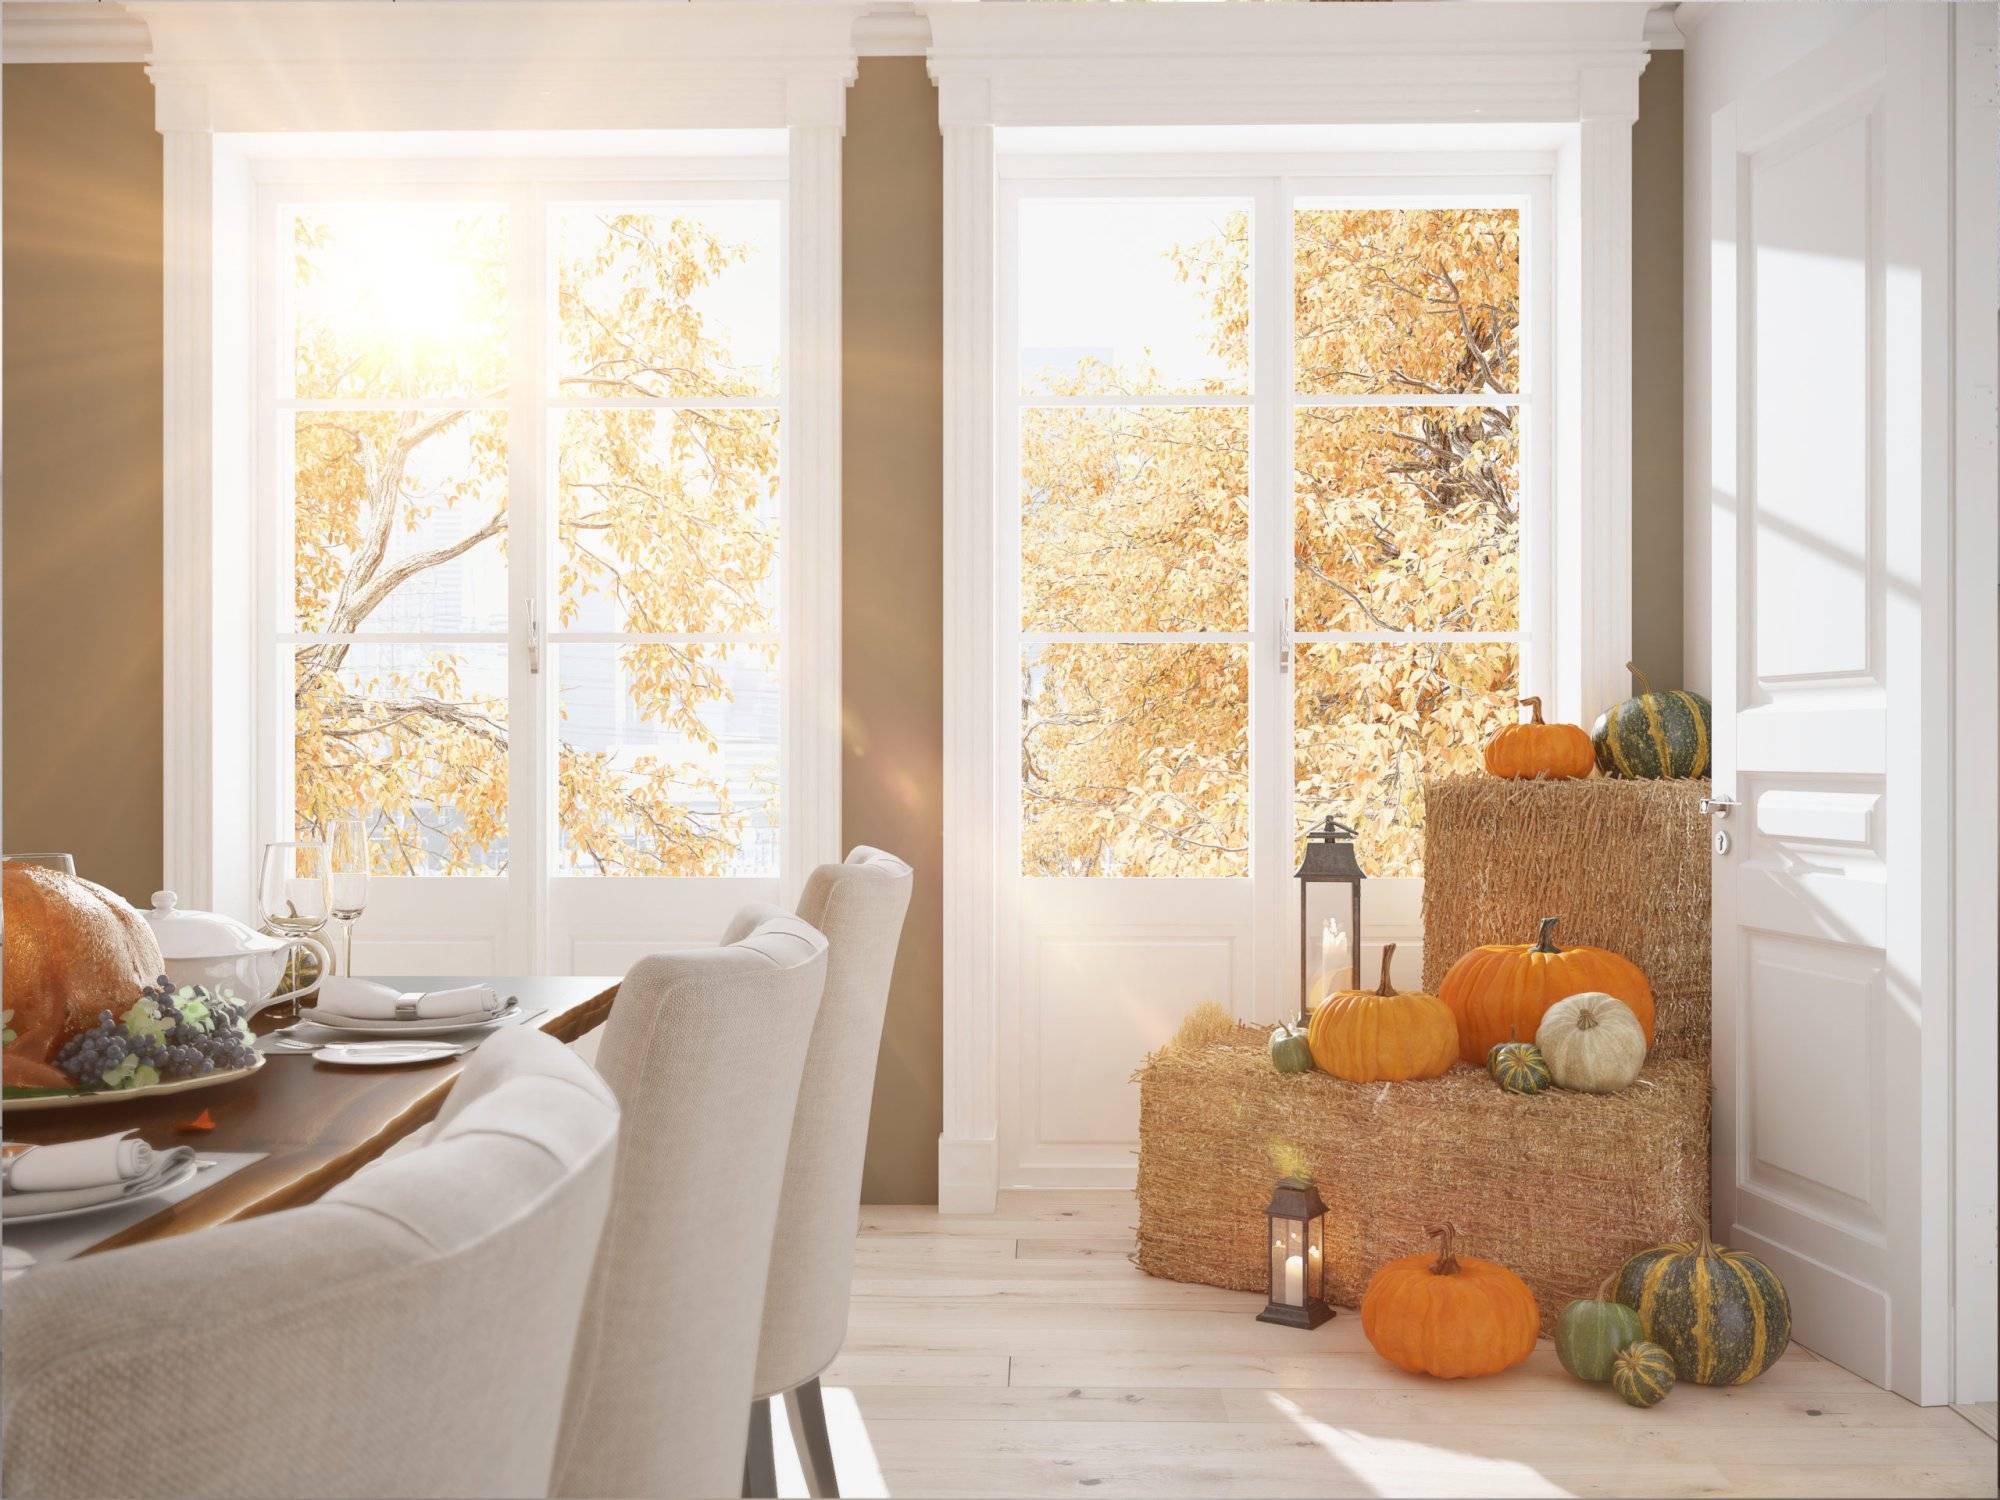 nordic kitchen in an apartment. 3D rendering. thanksgiving concept.